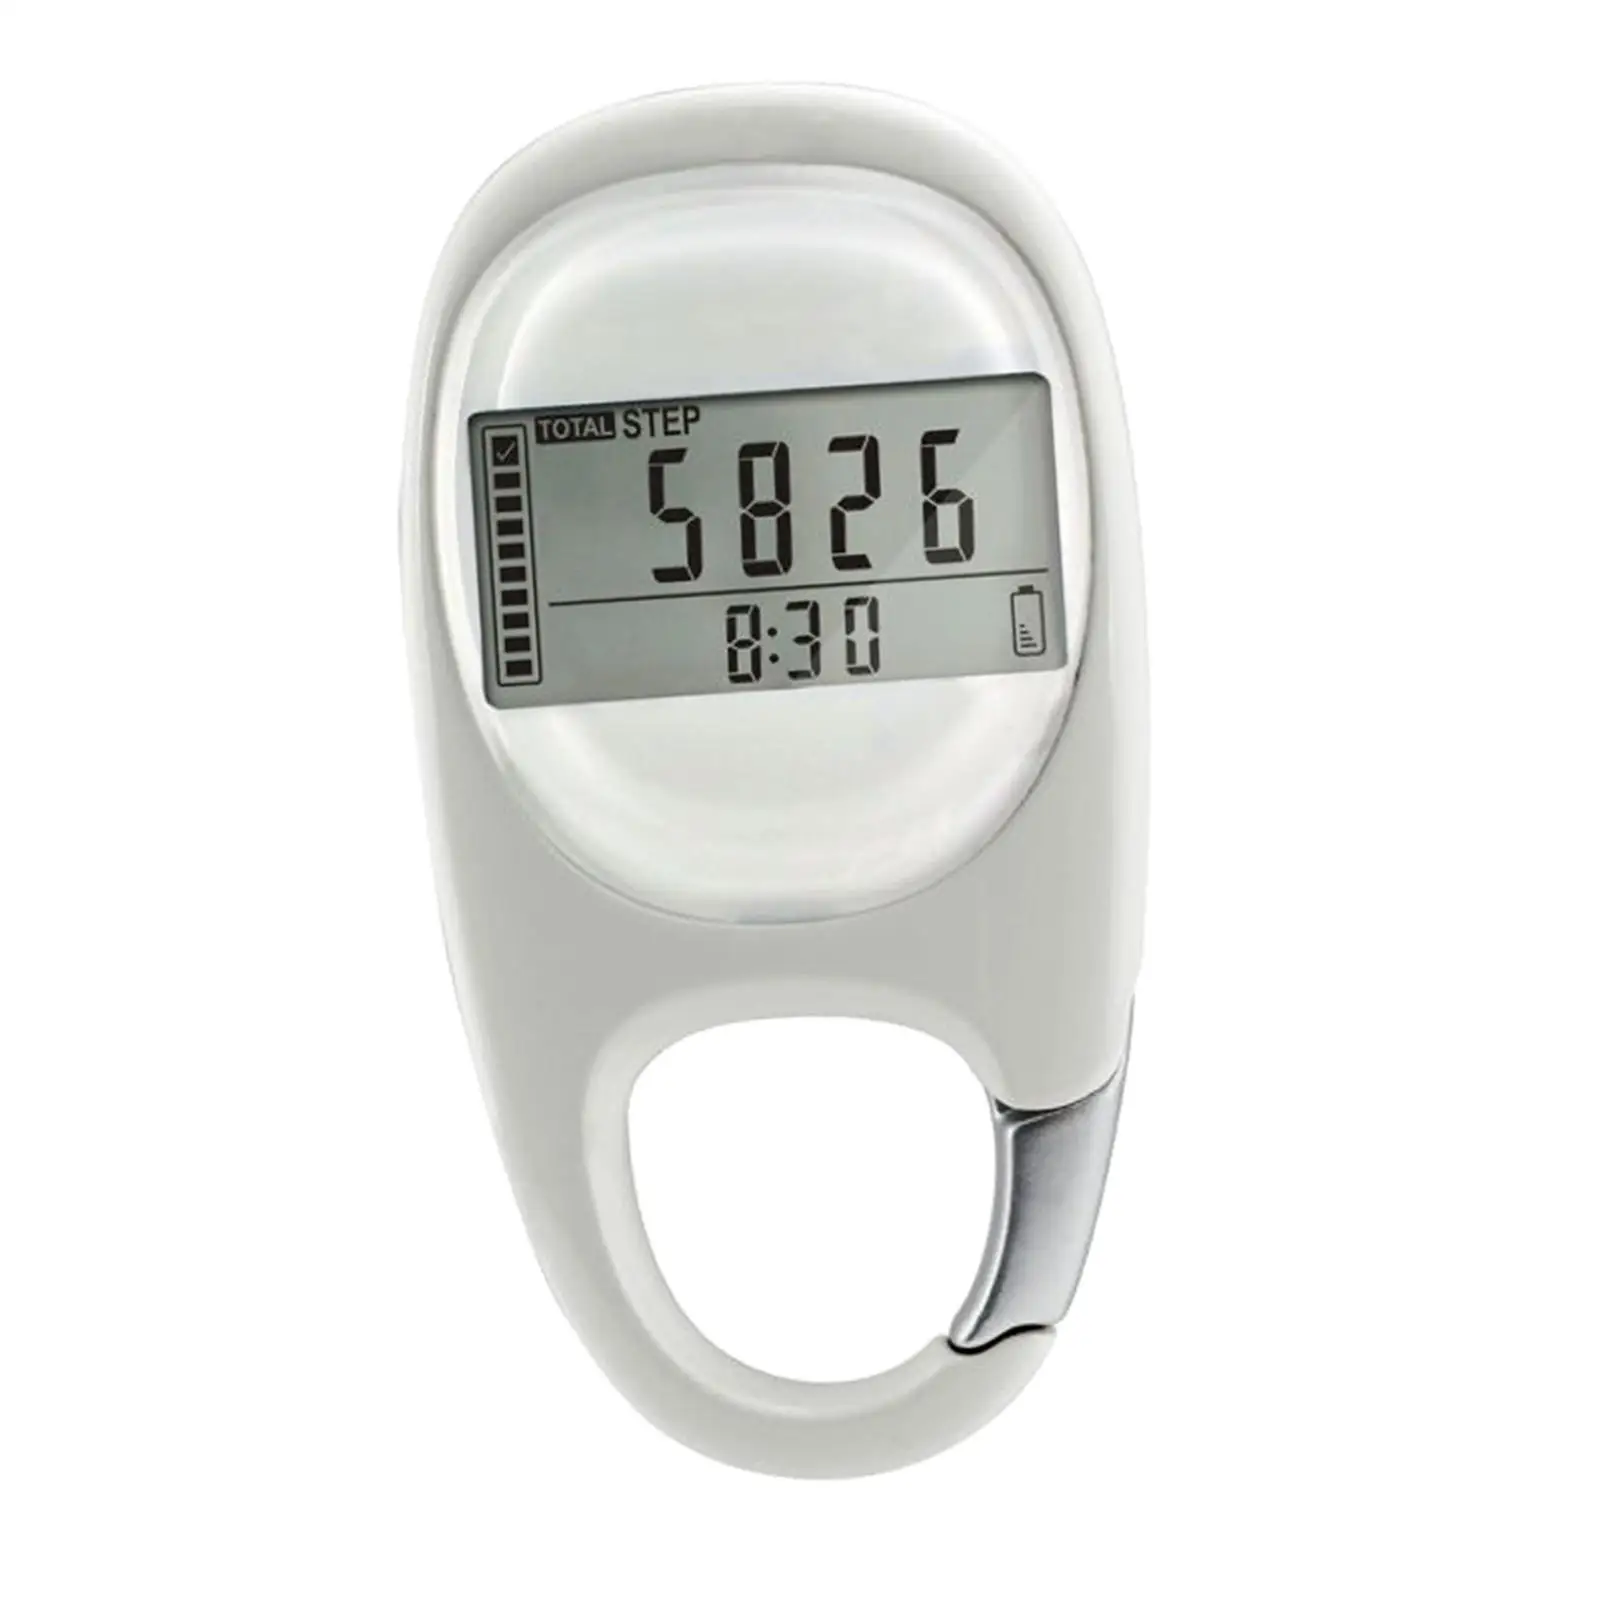 Step Distance Counter with Clip Walking 3D Sensor Pedometer for Hiking